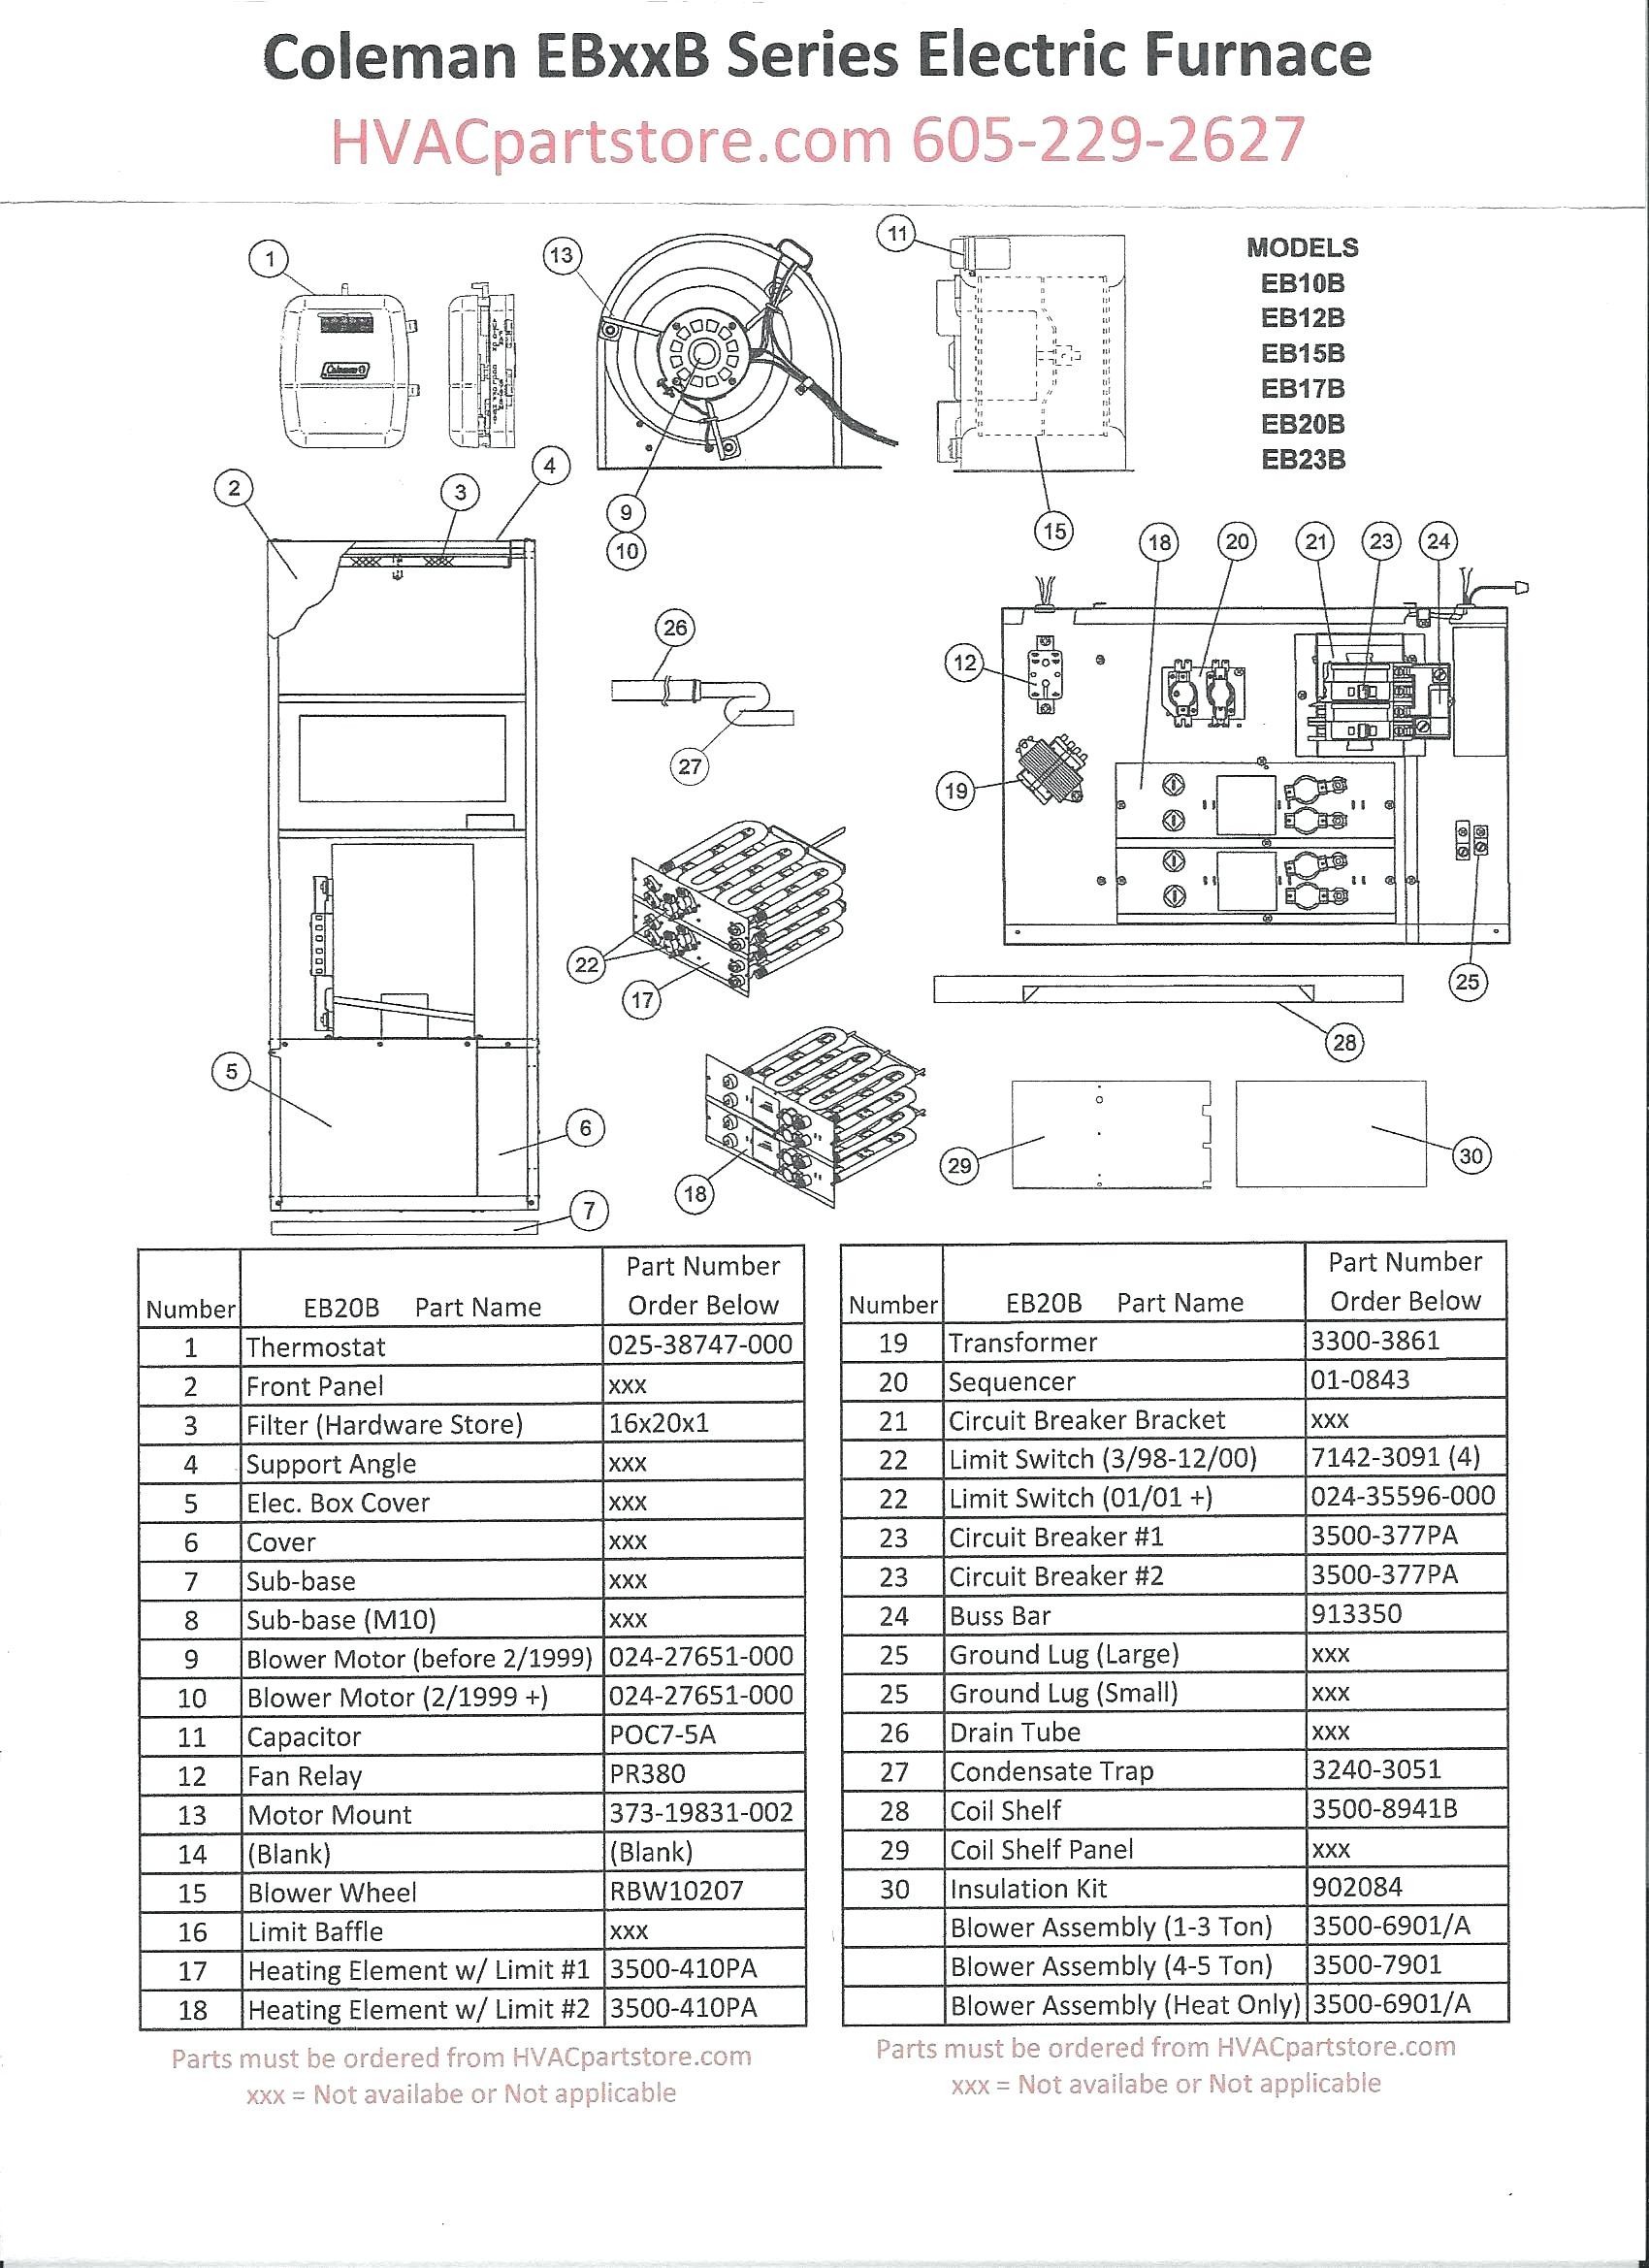 Wiring Diagram for Lennox Gas Furnace Valid Wiring Diagram Fabulous Wiring Diagram for Lennox Furnace Wiring